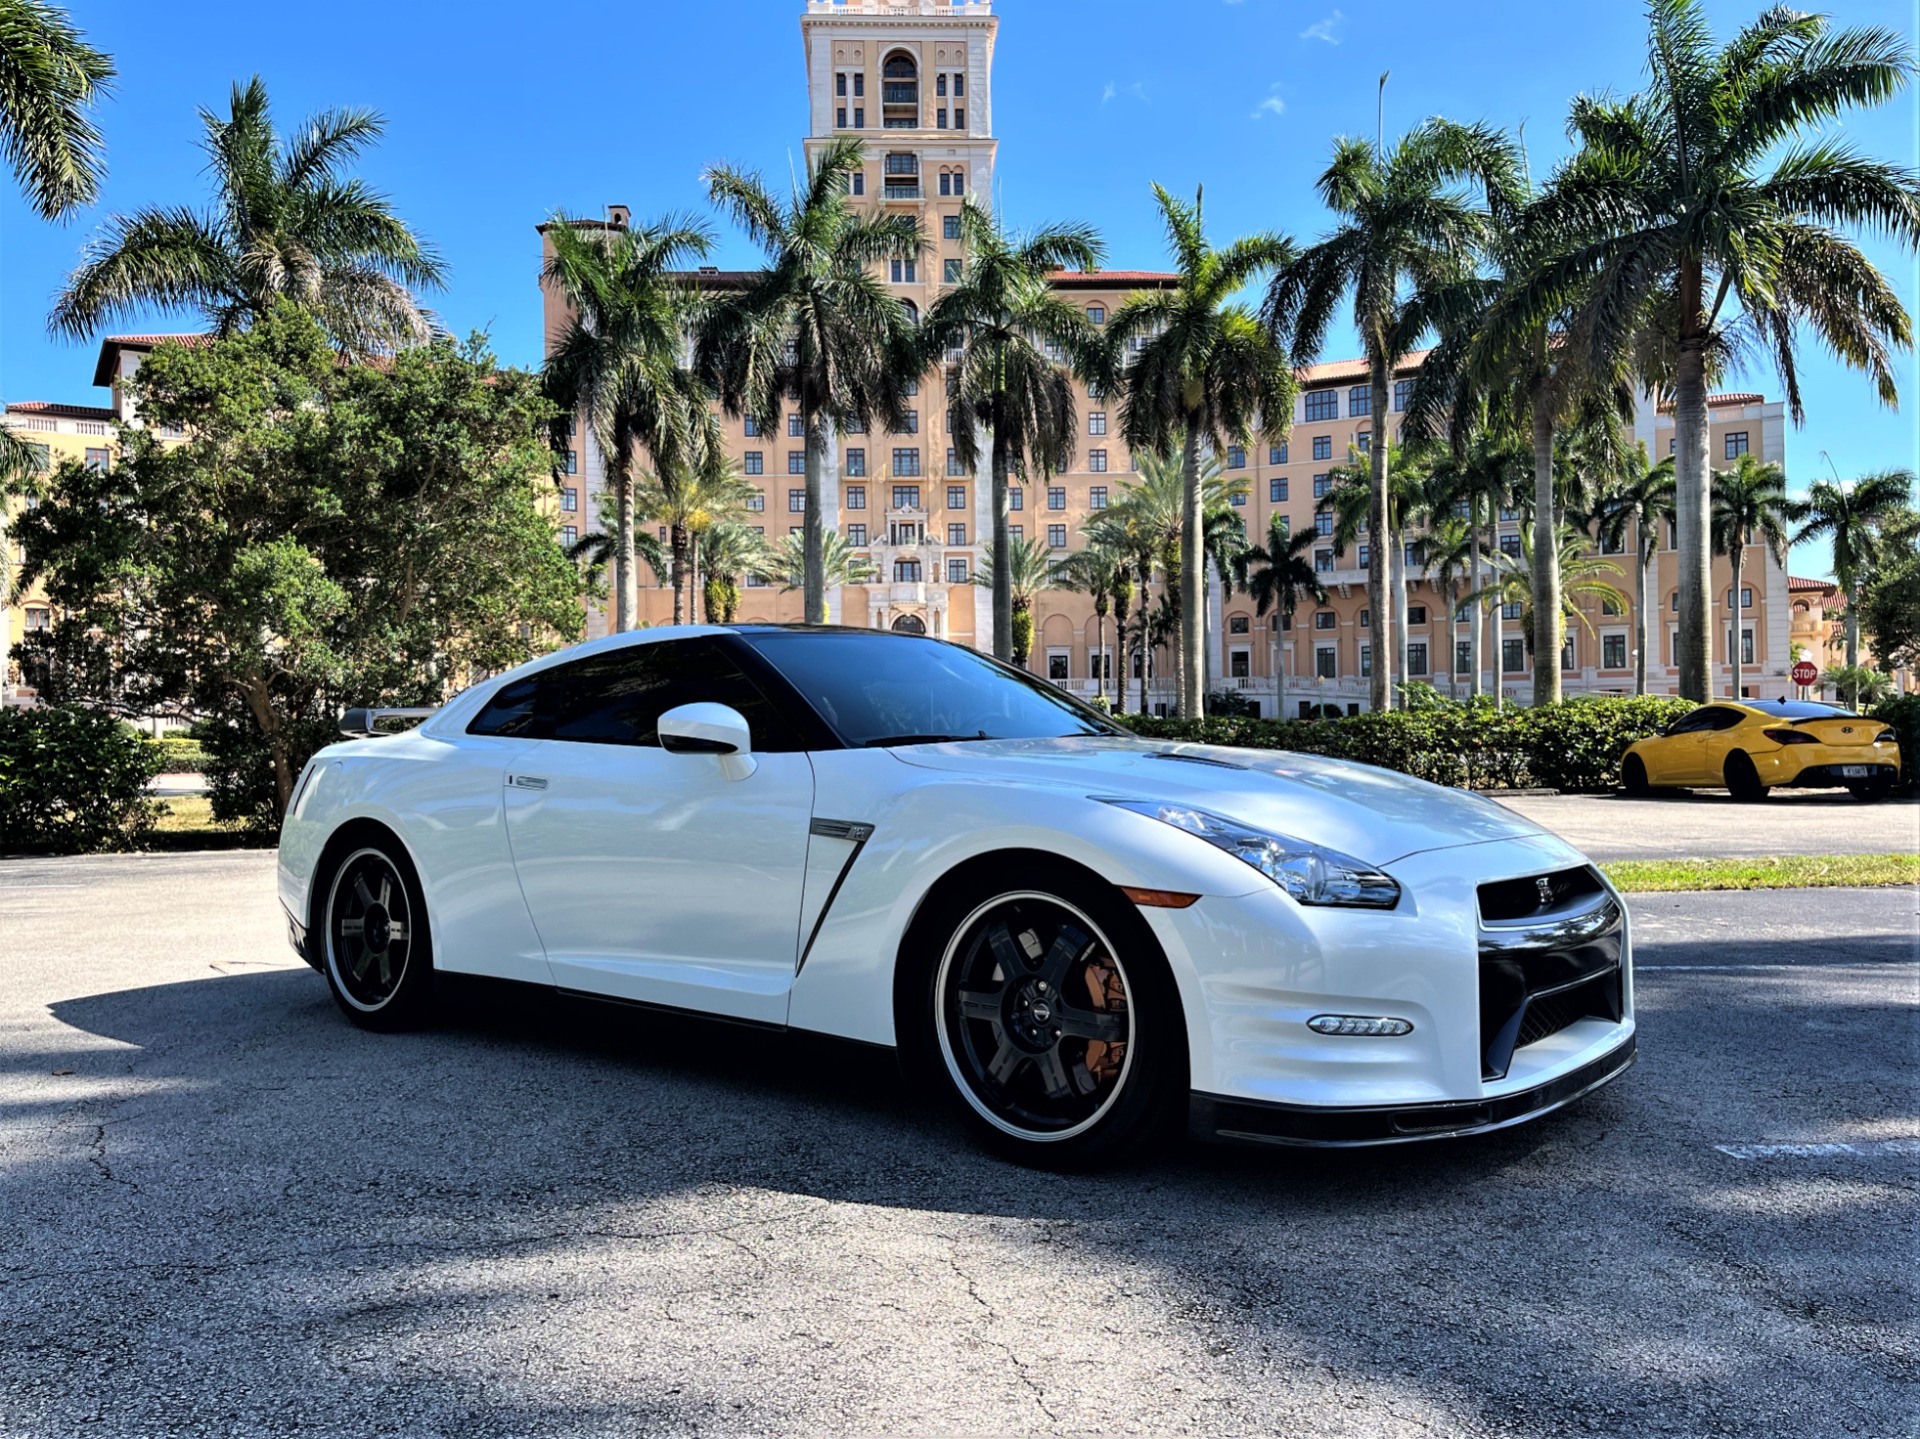 Used 2014 Nissan GT-R Track Edition for sale Sold at The Gables Sports Cars in Miami FL 33146 1